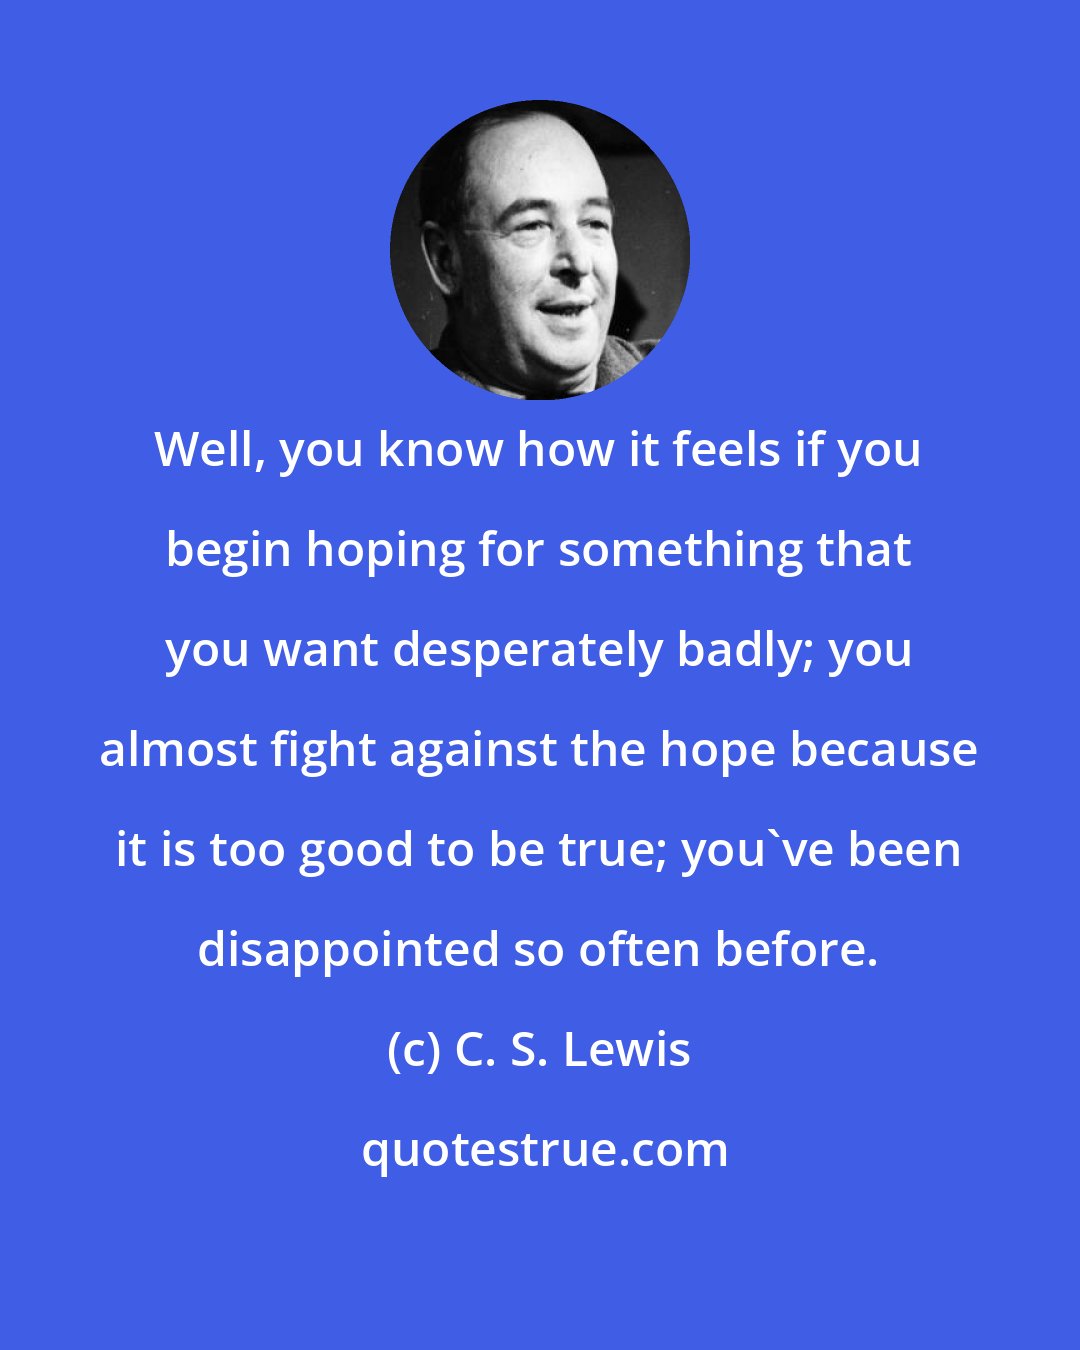 C. S. Lewis: Well, you know how it feels if you begin hoping for something that you want desperately badly; you almost fight against the hope because it is too good to be true; you've been disappointed so often before.